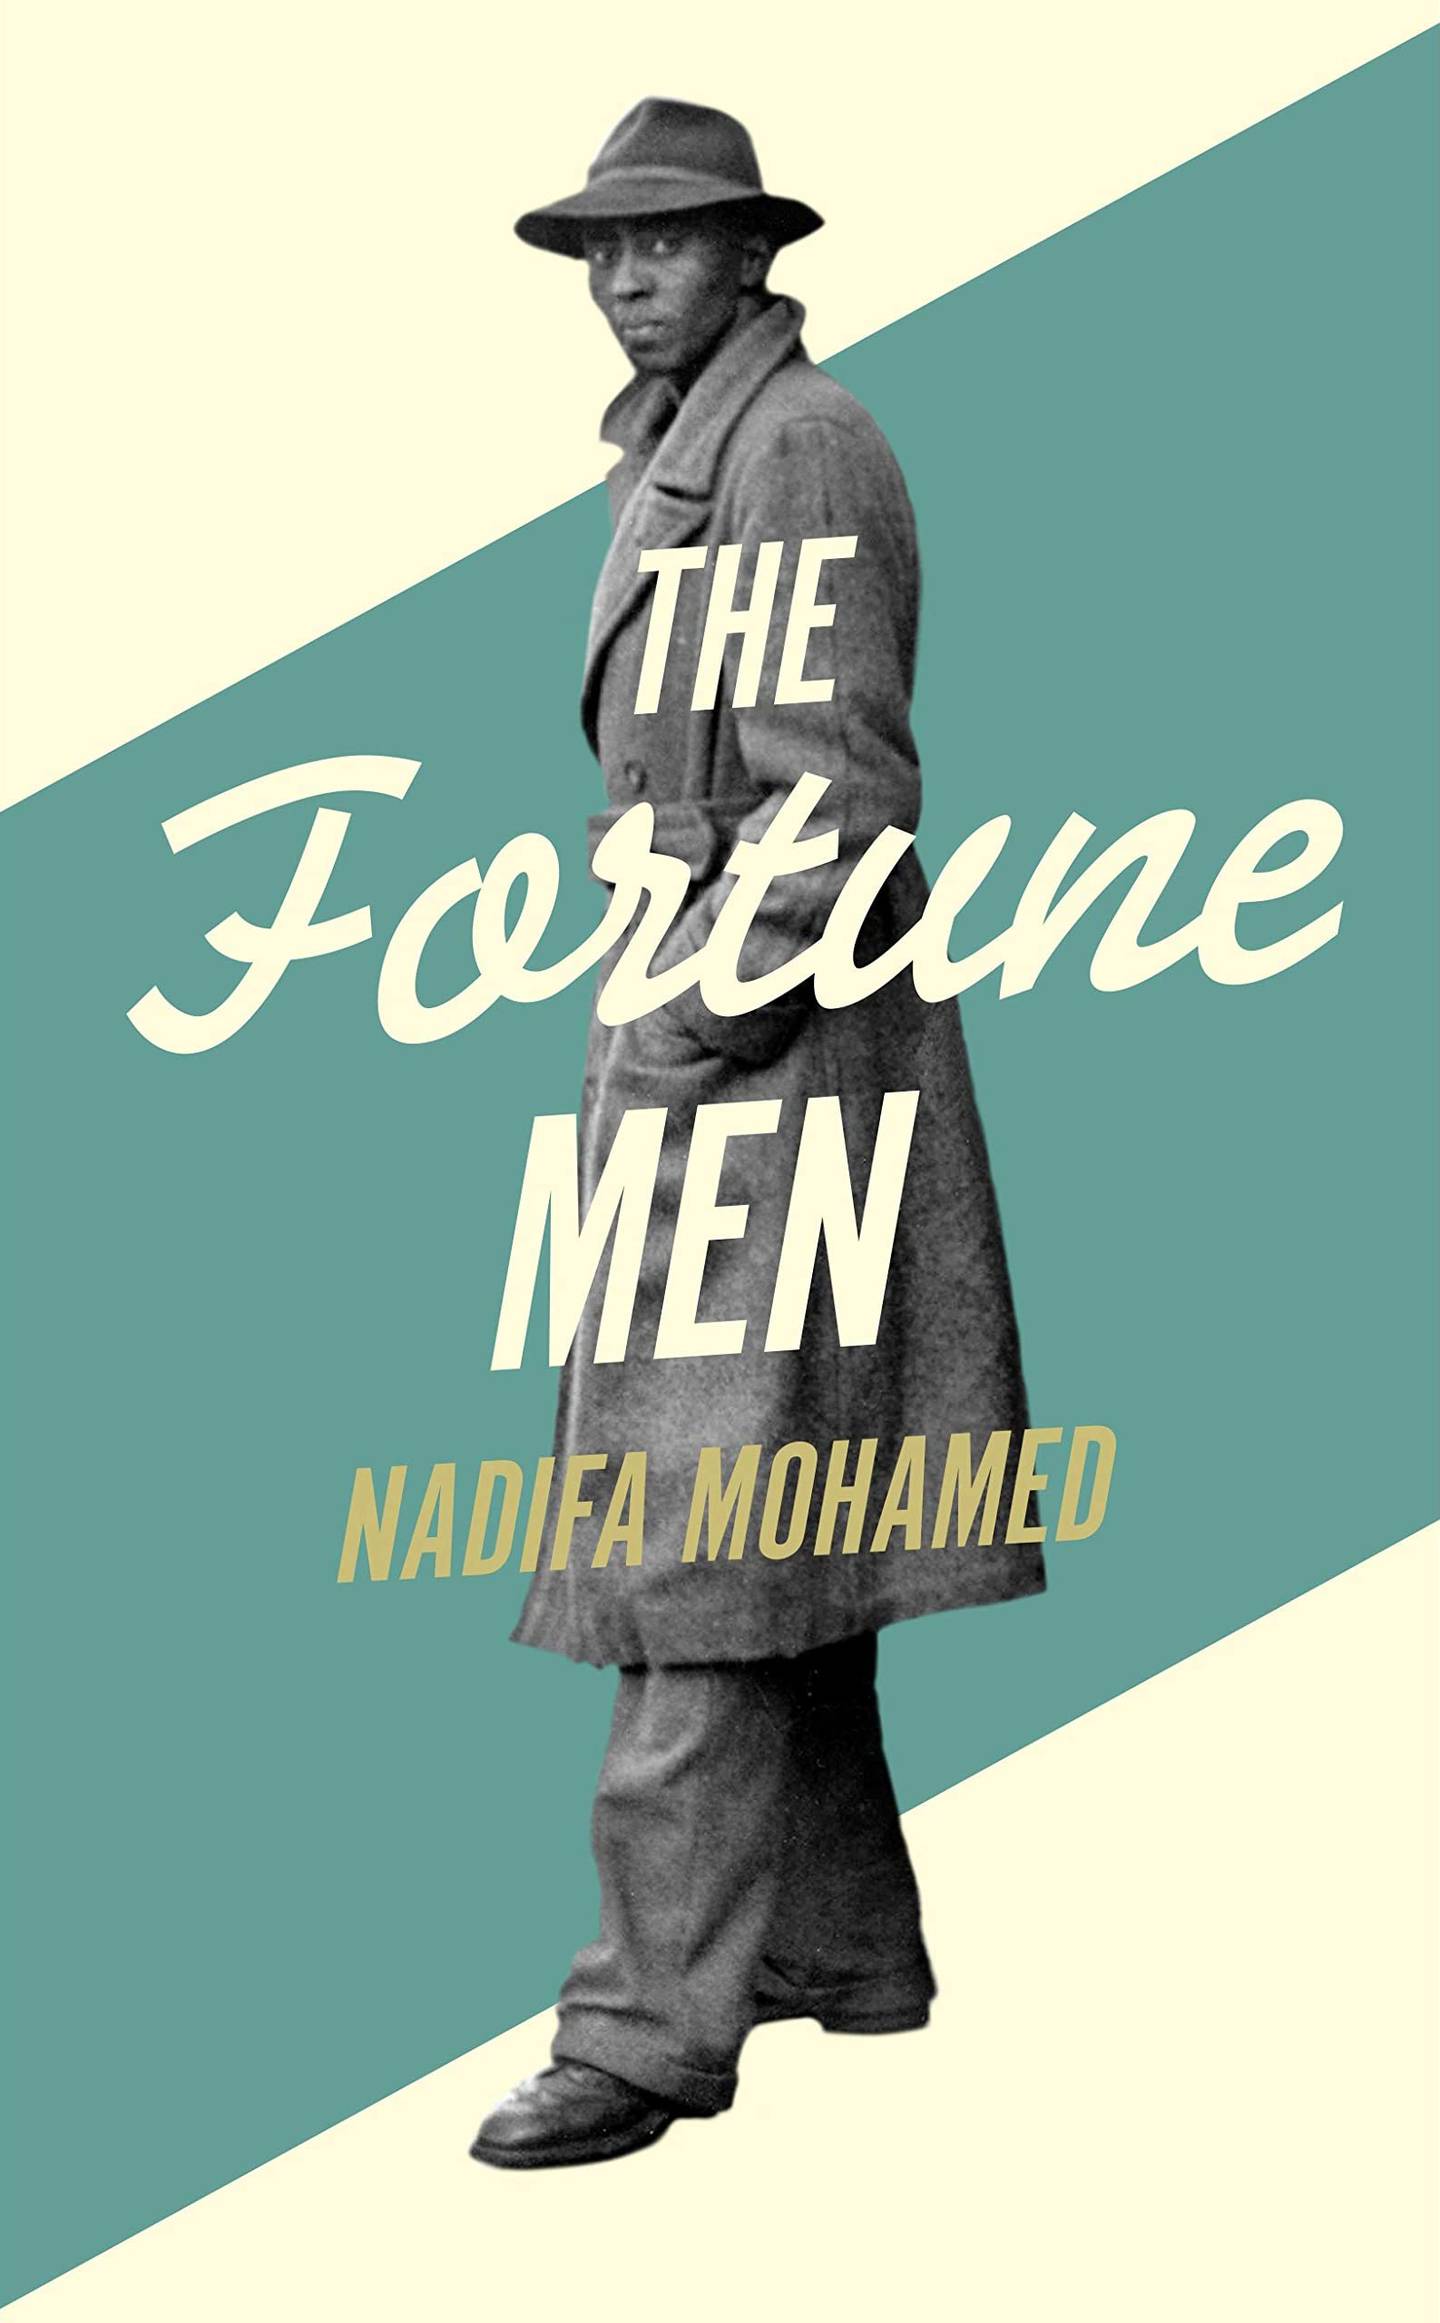 'The Fortune Men' by Nadifa Mohamed is about a man wrongly found guilty of murder. Viking